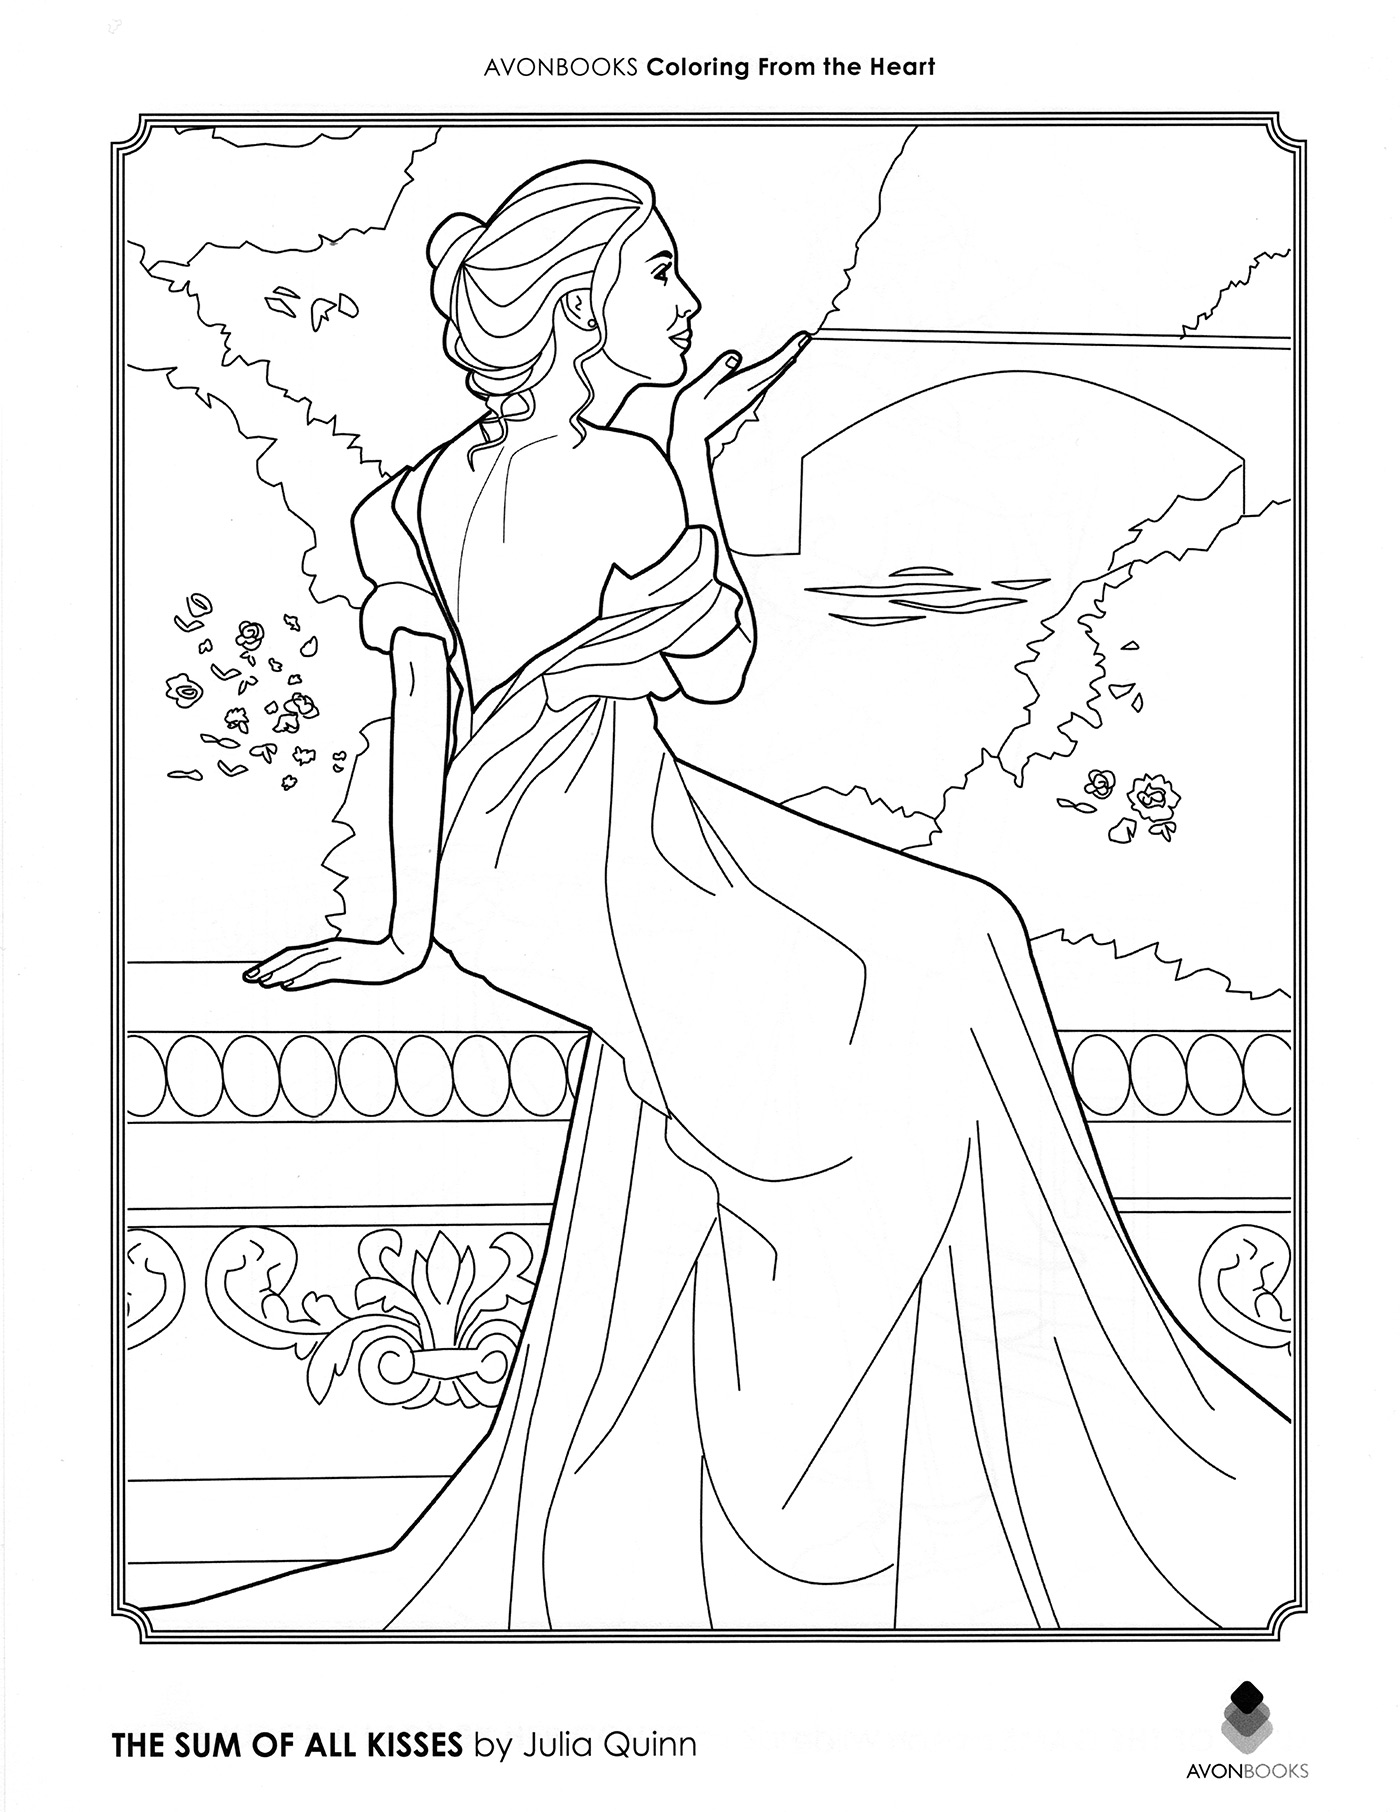 The Sum of All Kisses Coloring Page | Julia Quinn | Author of Historical  Romance Novels